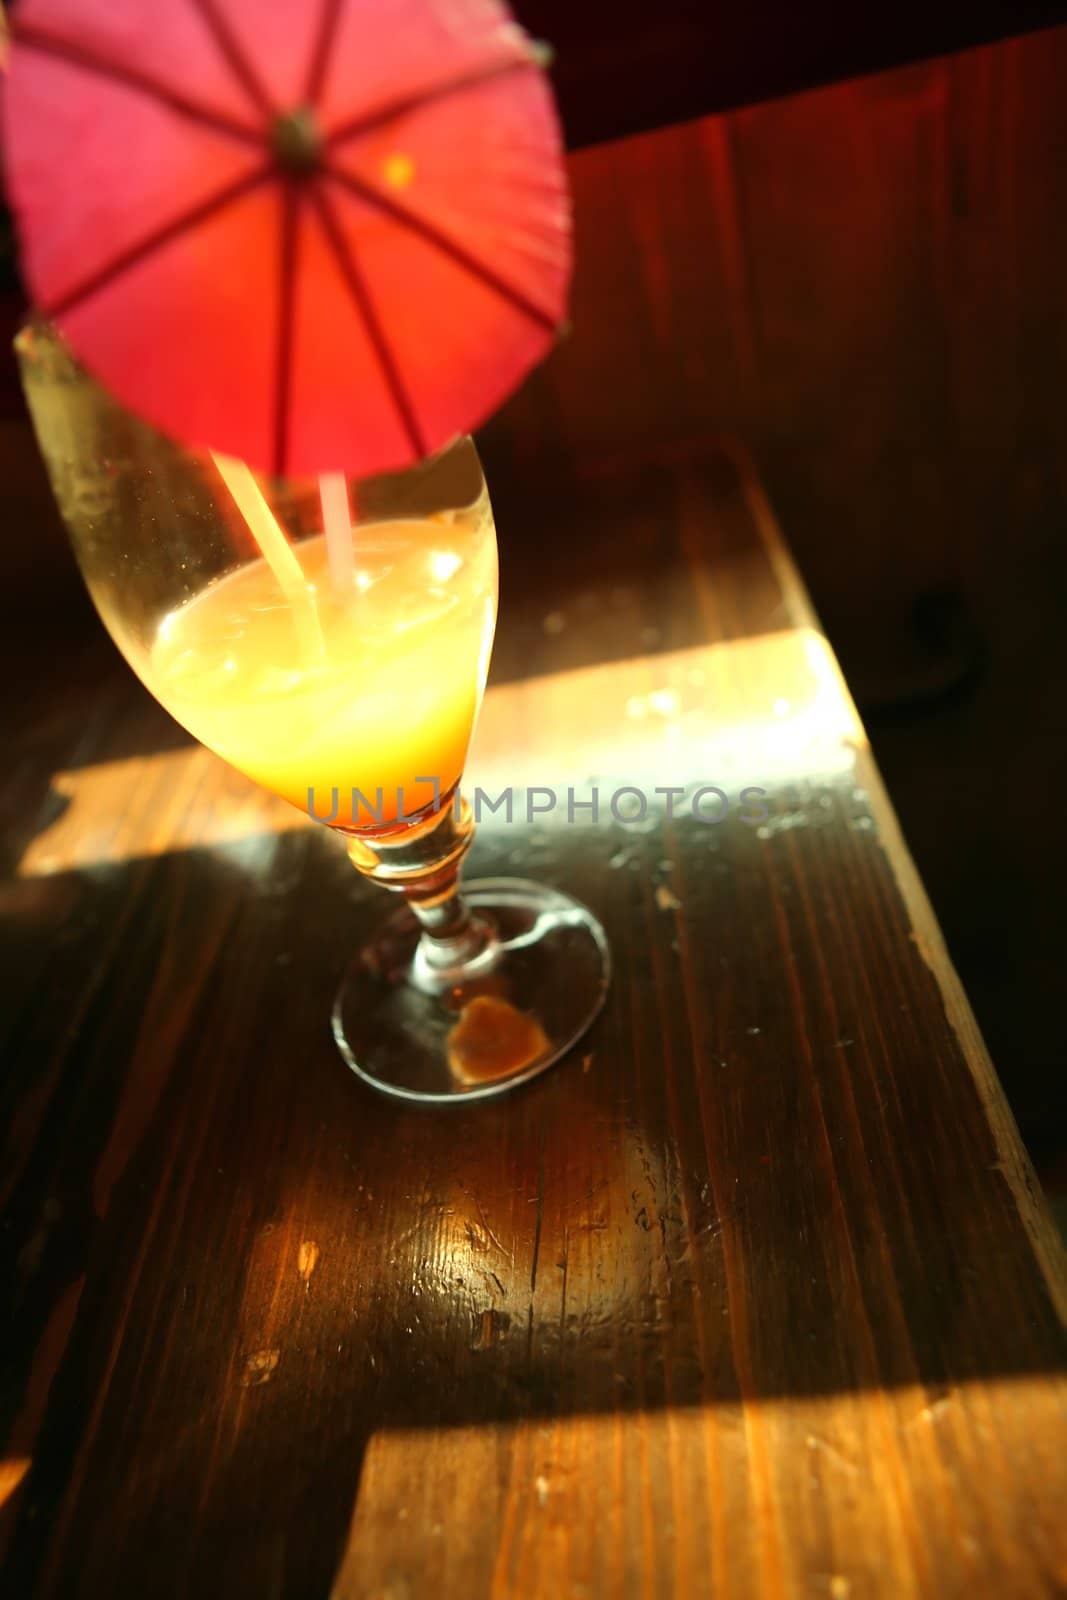 Goblet with Luminous Yellow Drink on Edge of the Table